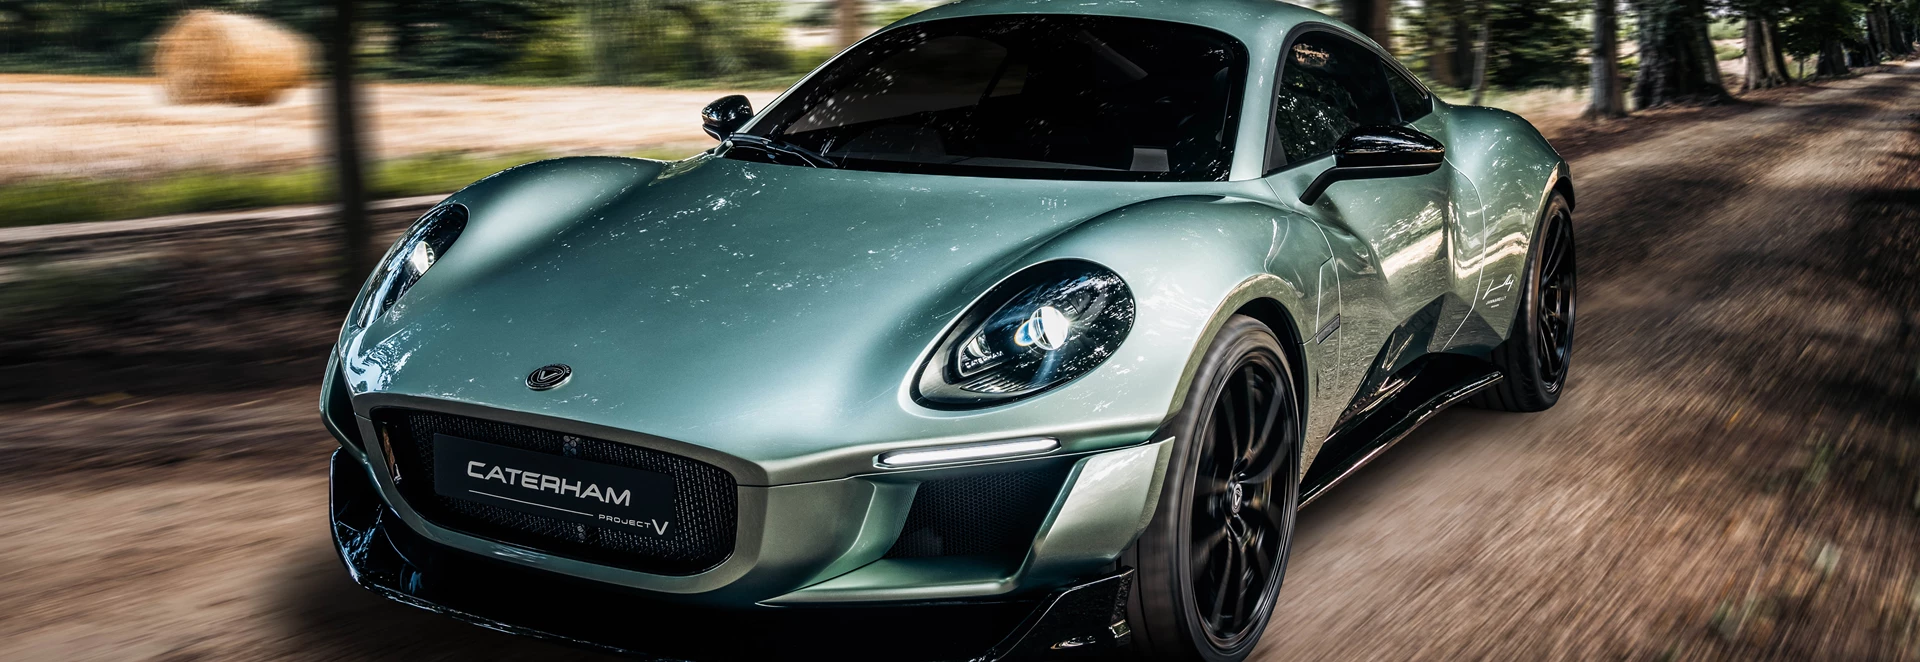 Caterham's Project V - A Step into the Future or A Departure from Legacy? 